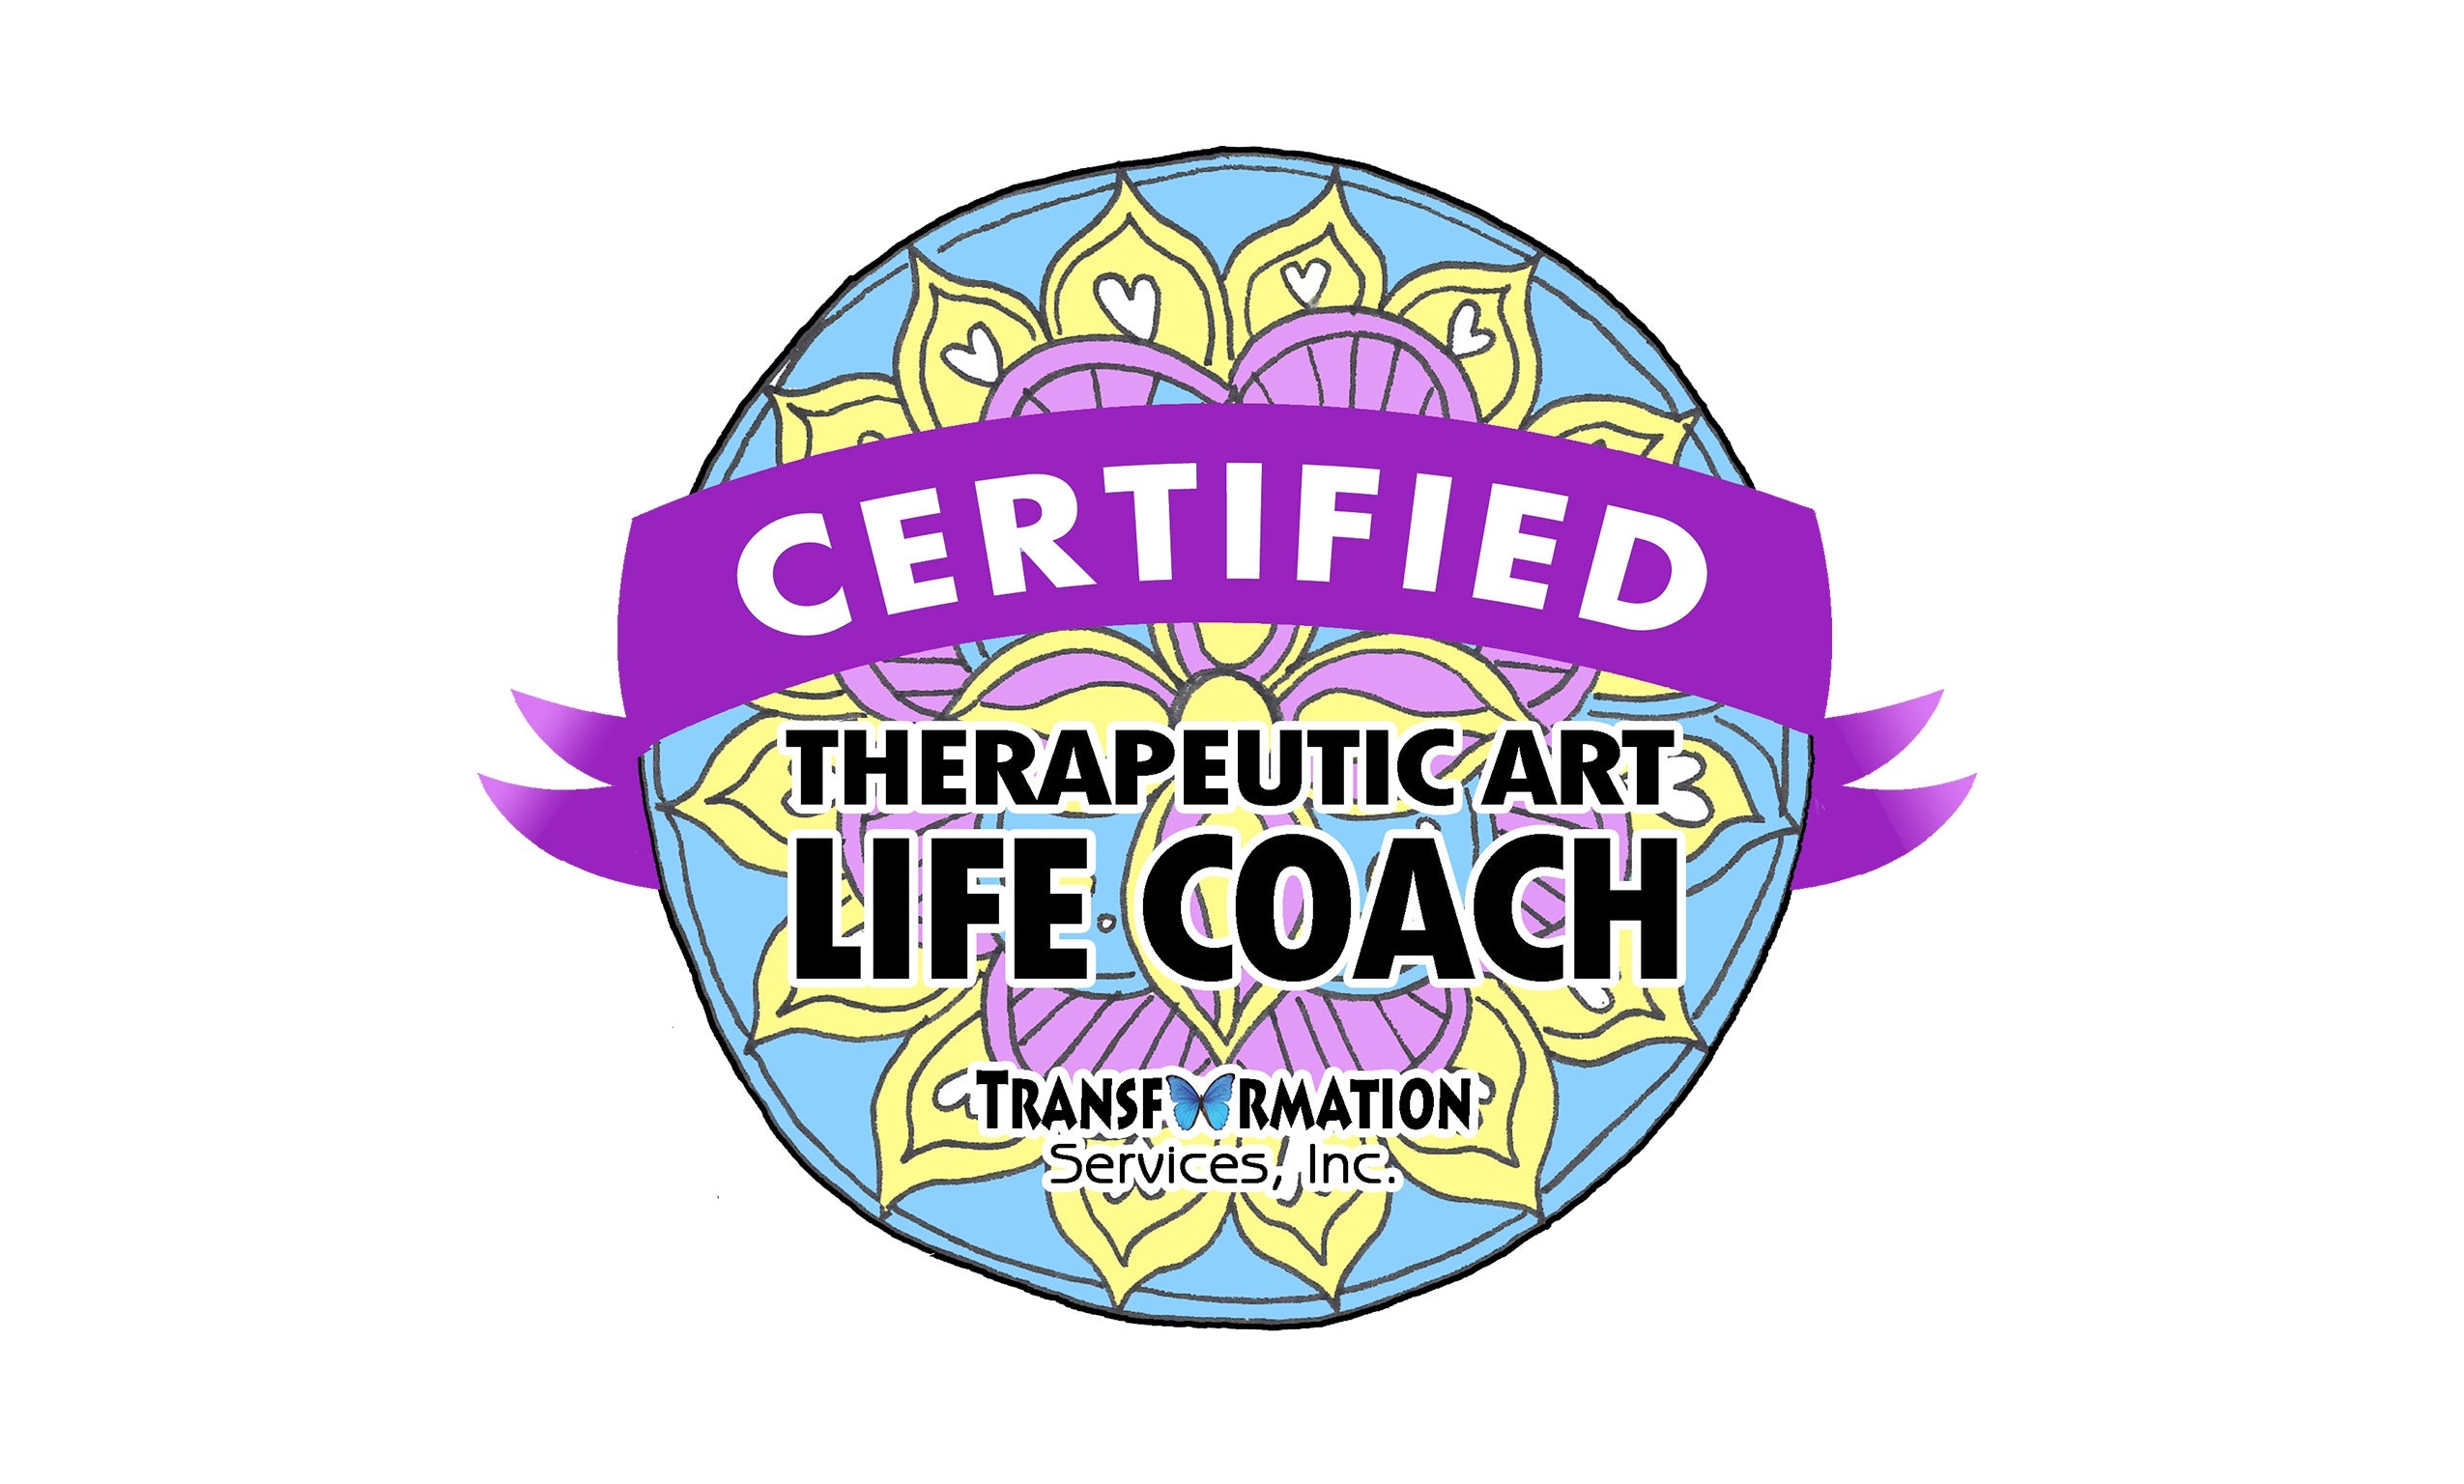 Therapeutic Art Life Coach Certification